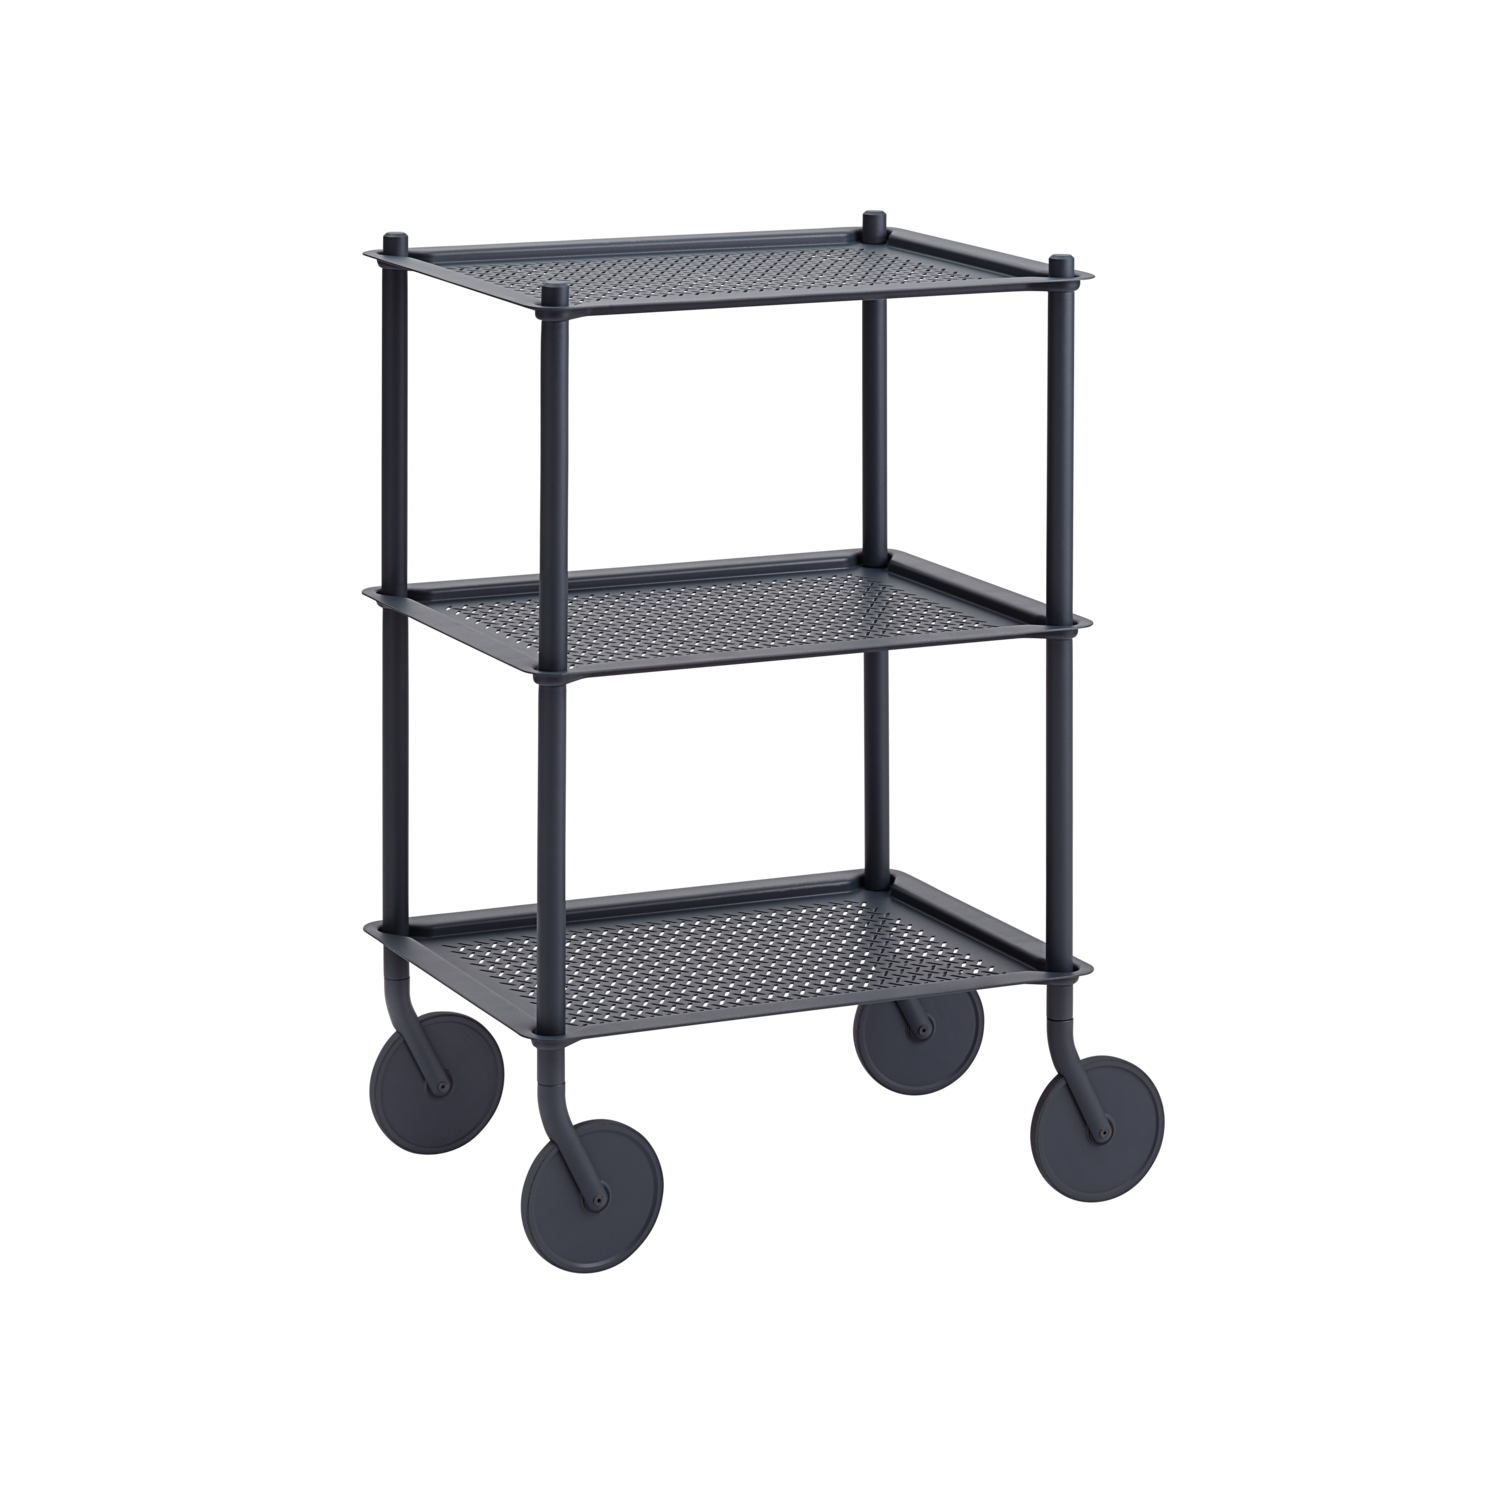 | Subtle Flow Trolley materiality